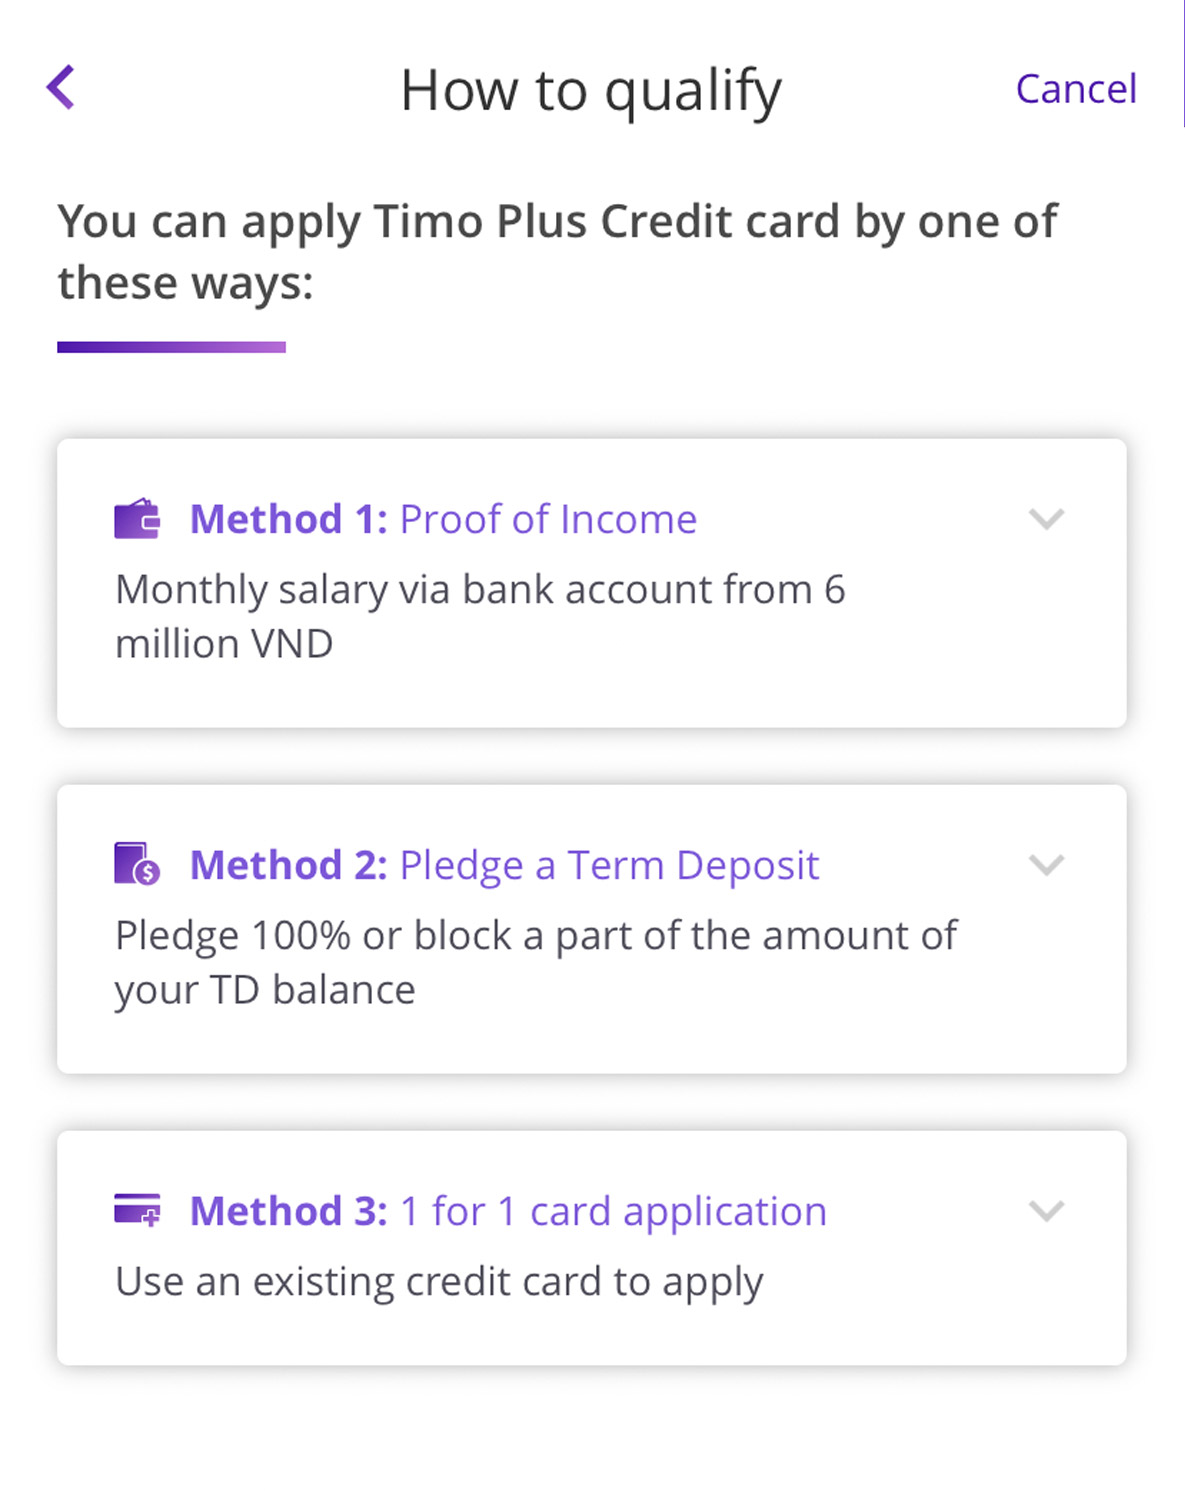 How does Timo Mastercard stand out compared to traditional credit cards?